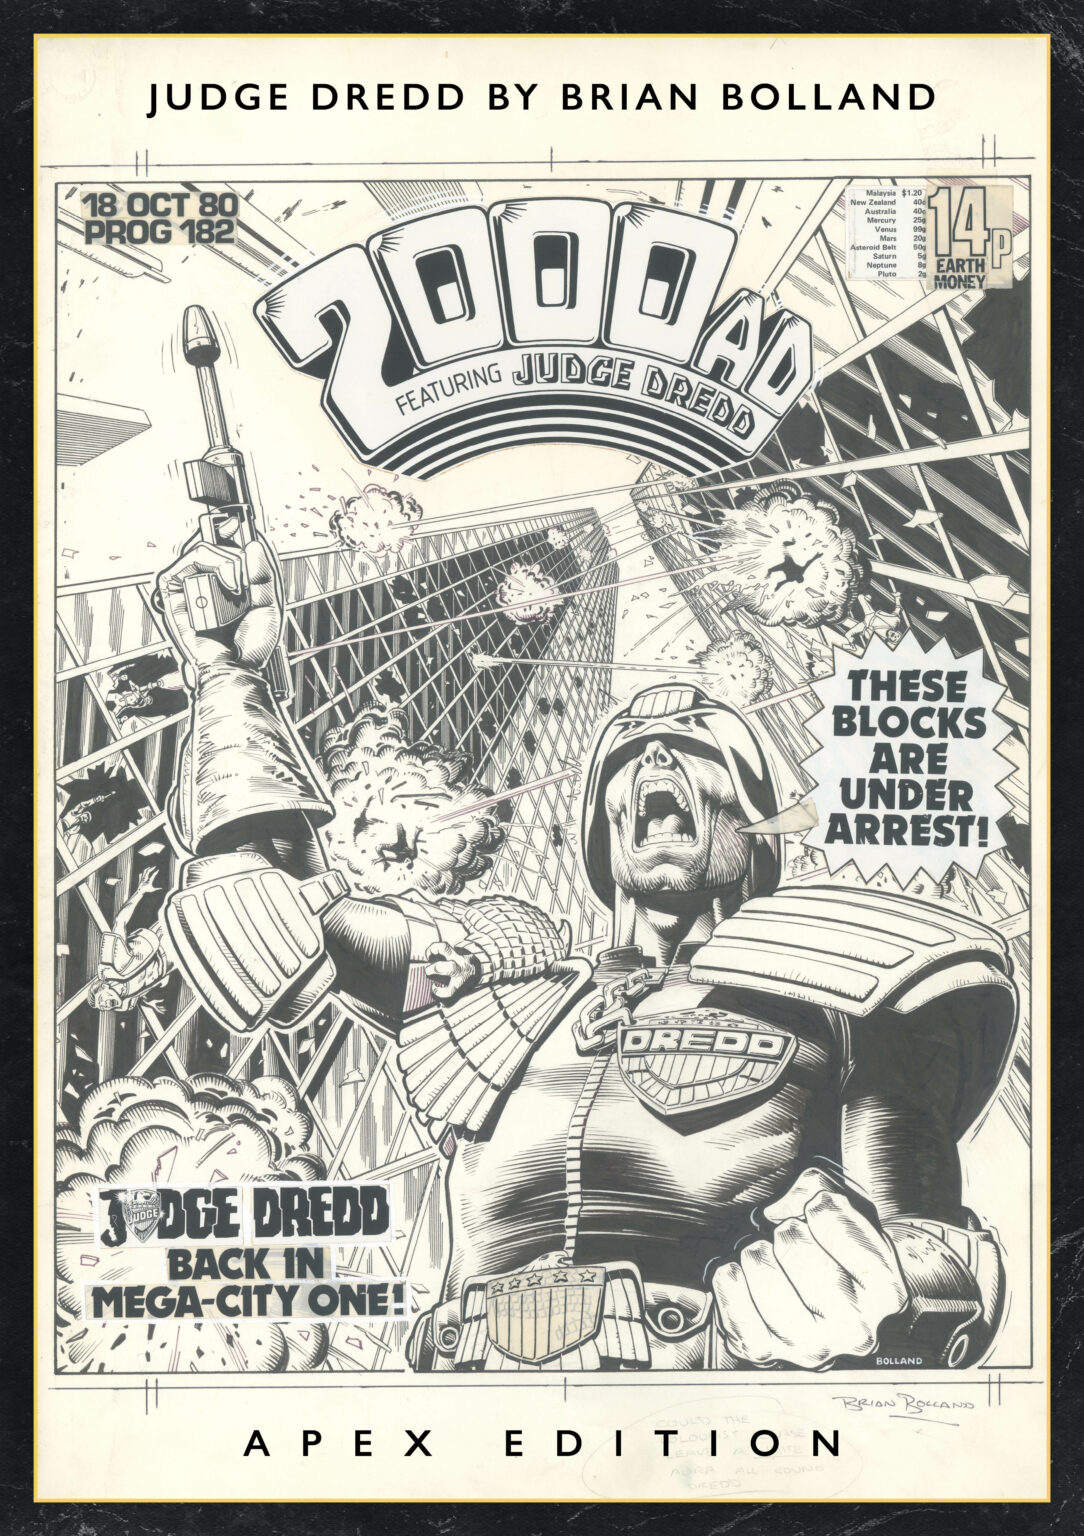 Brian Bolland: The Apex Edition' Coming In 2022: But, Can You Help Find  Pages? – COMICON